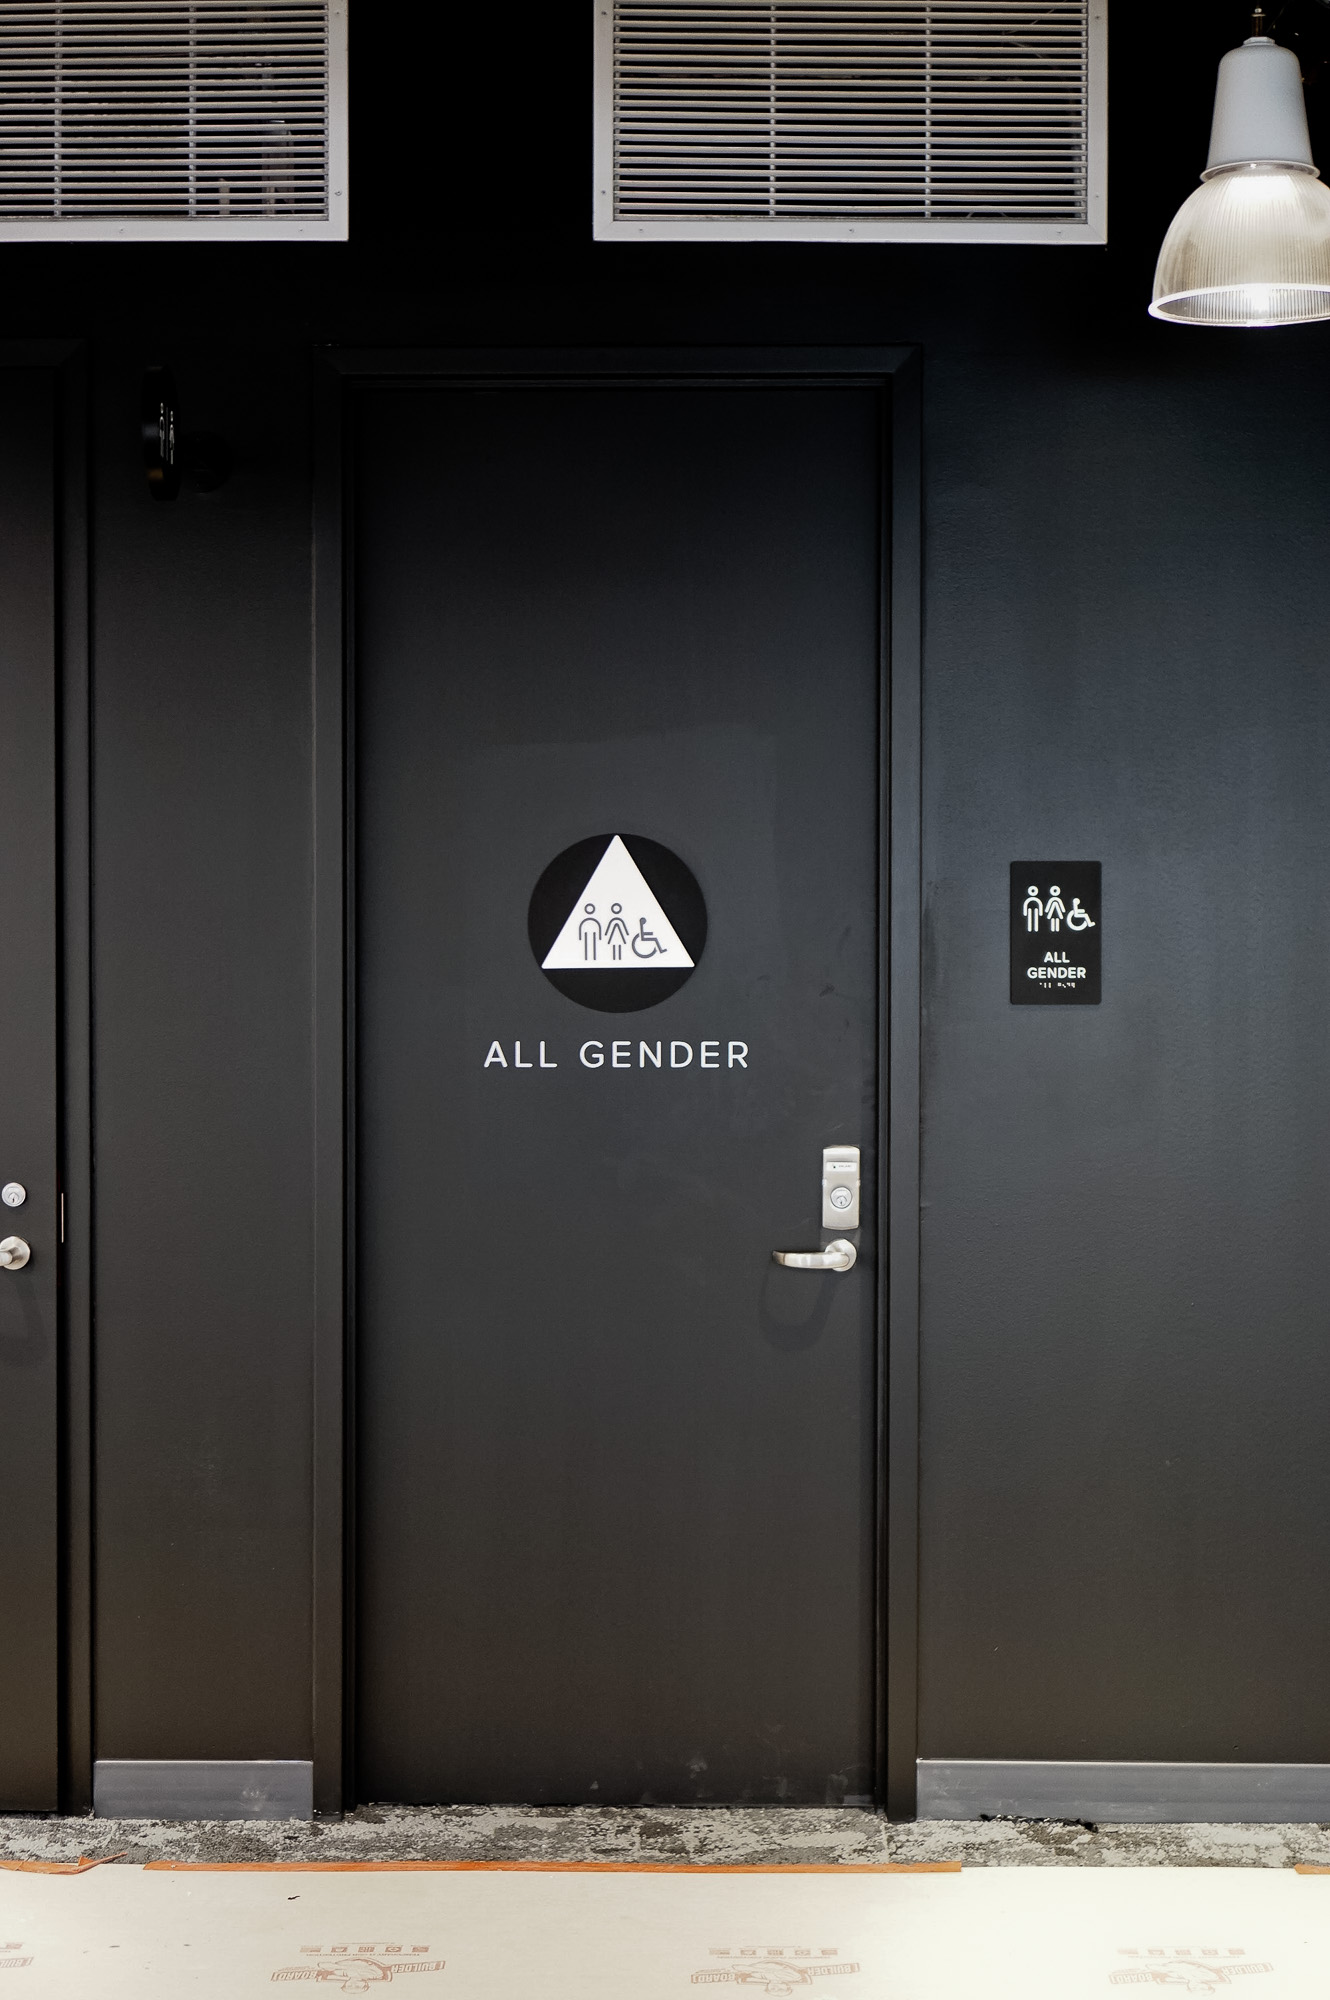 Modern, matte black restroom signs with white icons on black walls for the restrooms of Scale, a San Francisco based company delivering high quality training data for AI applications such as self-driving cars, mapping, AR/VR, robotics, and more.